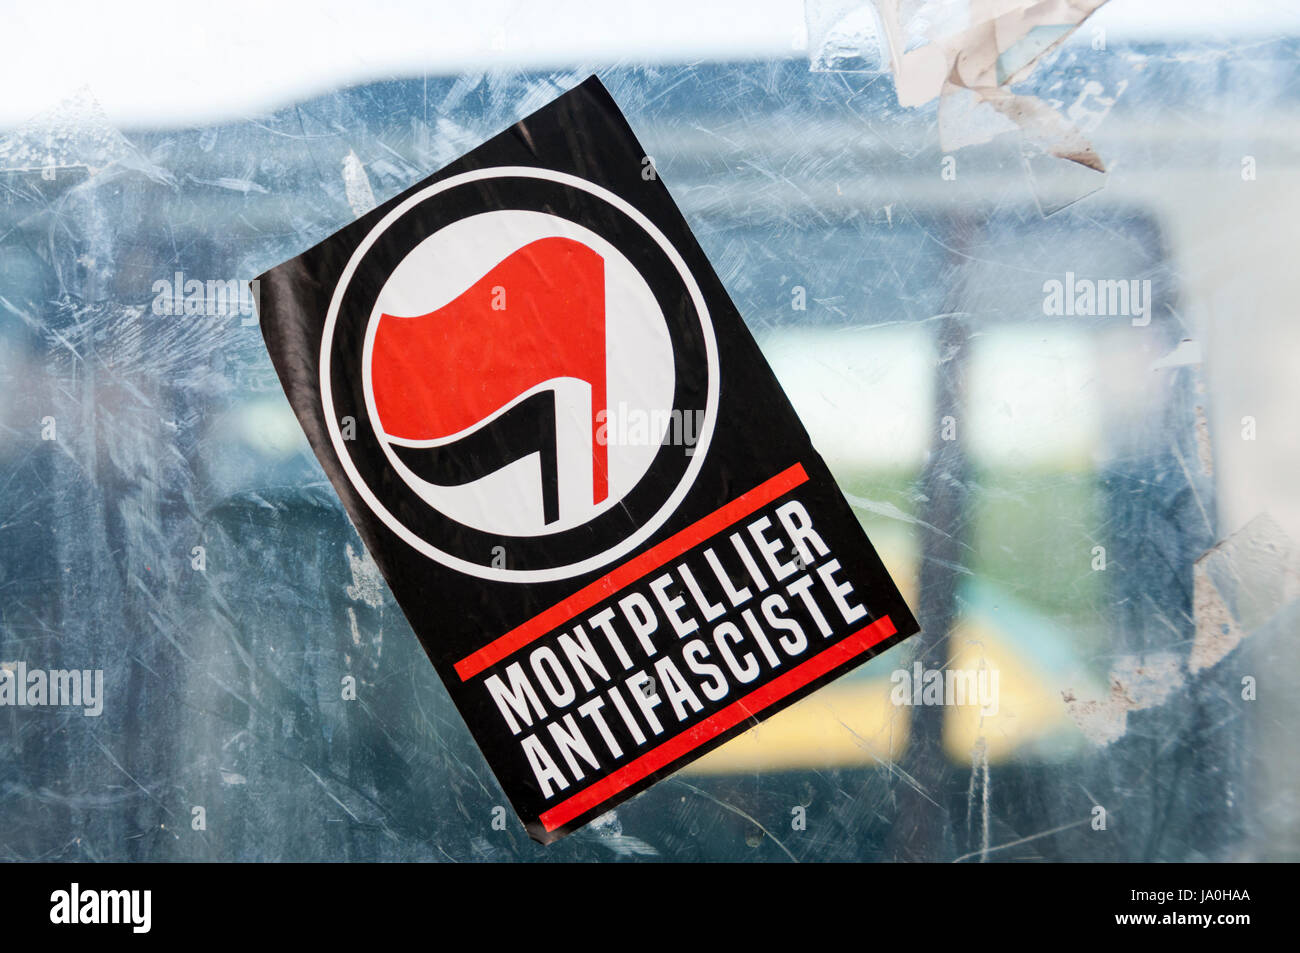 Antifa symbol on a Montpellier Antifasciste sticker in Montpellier in the south of France. Stock Photo